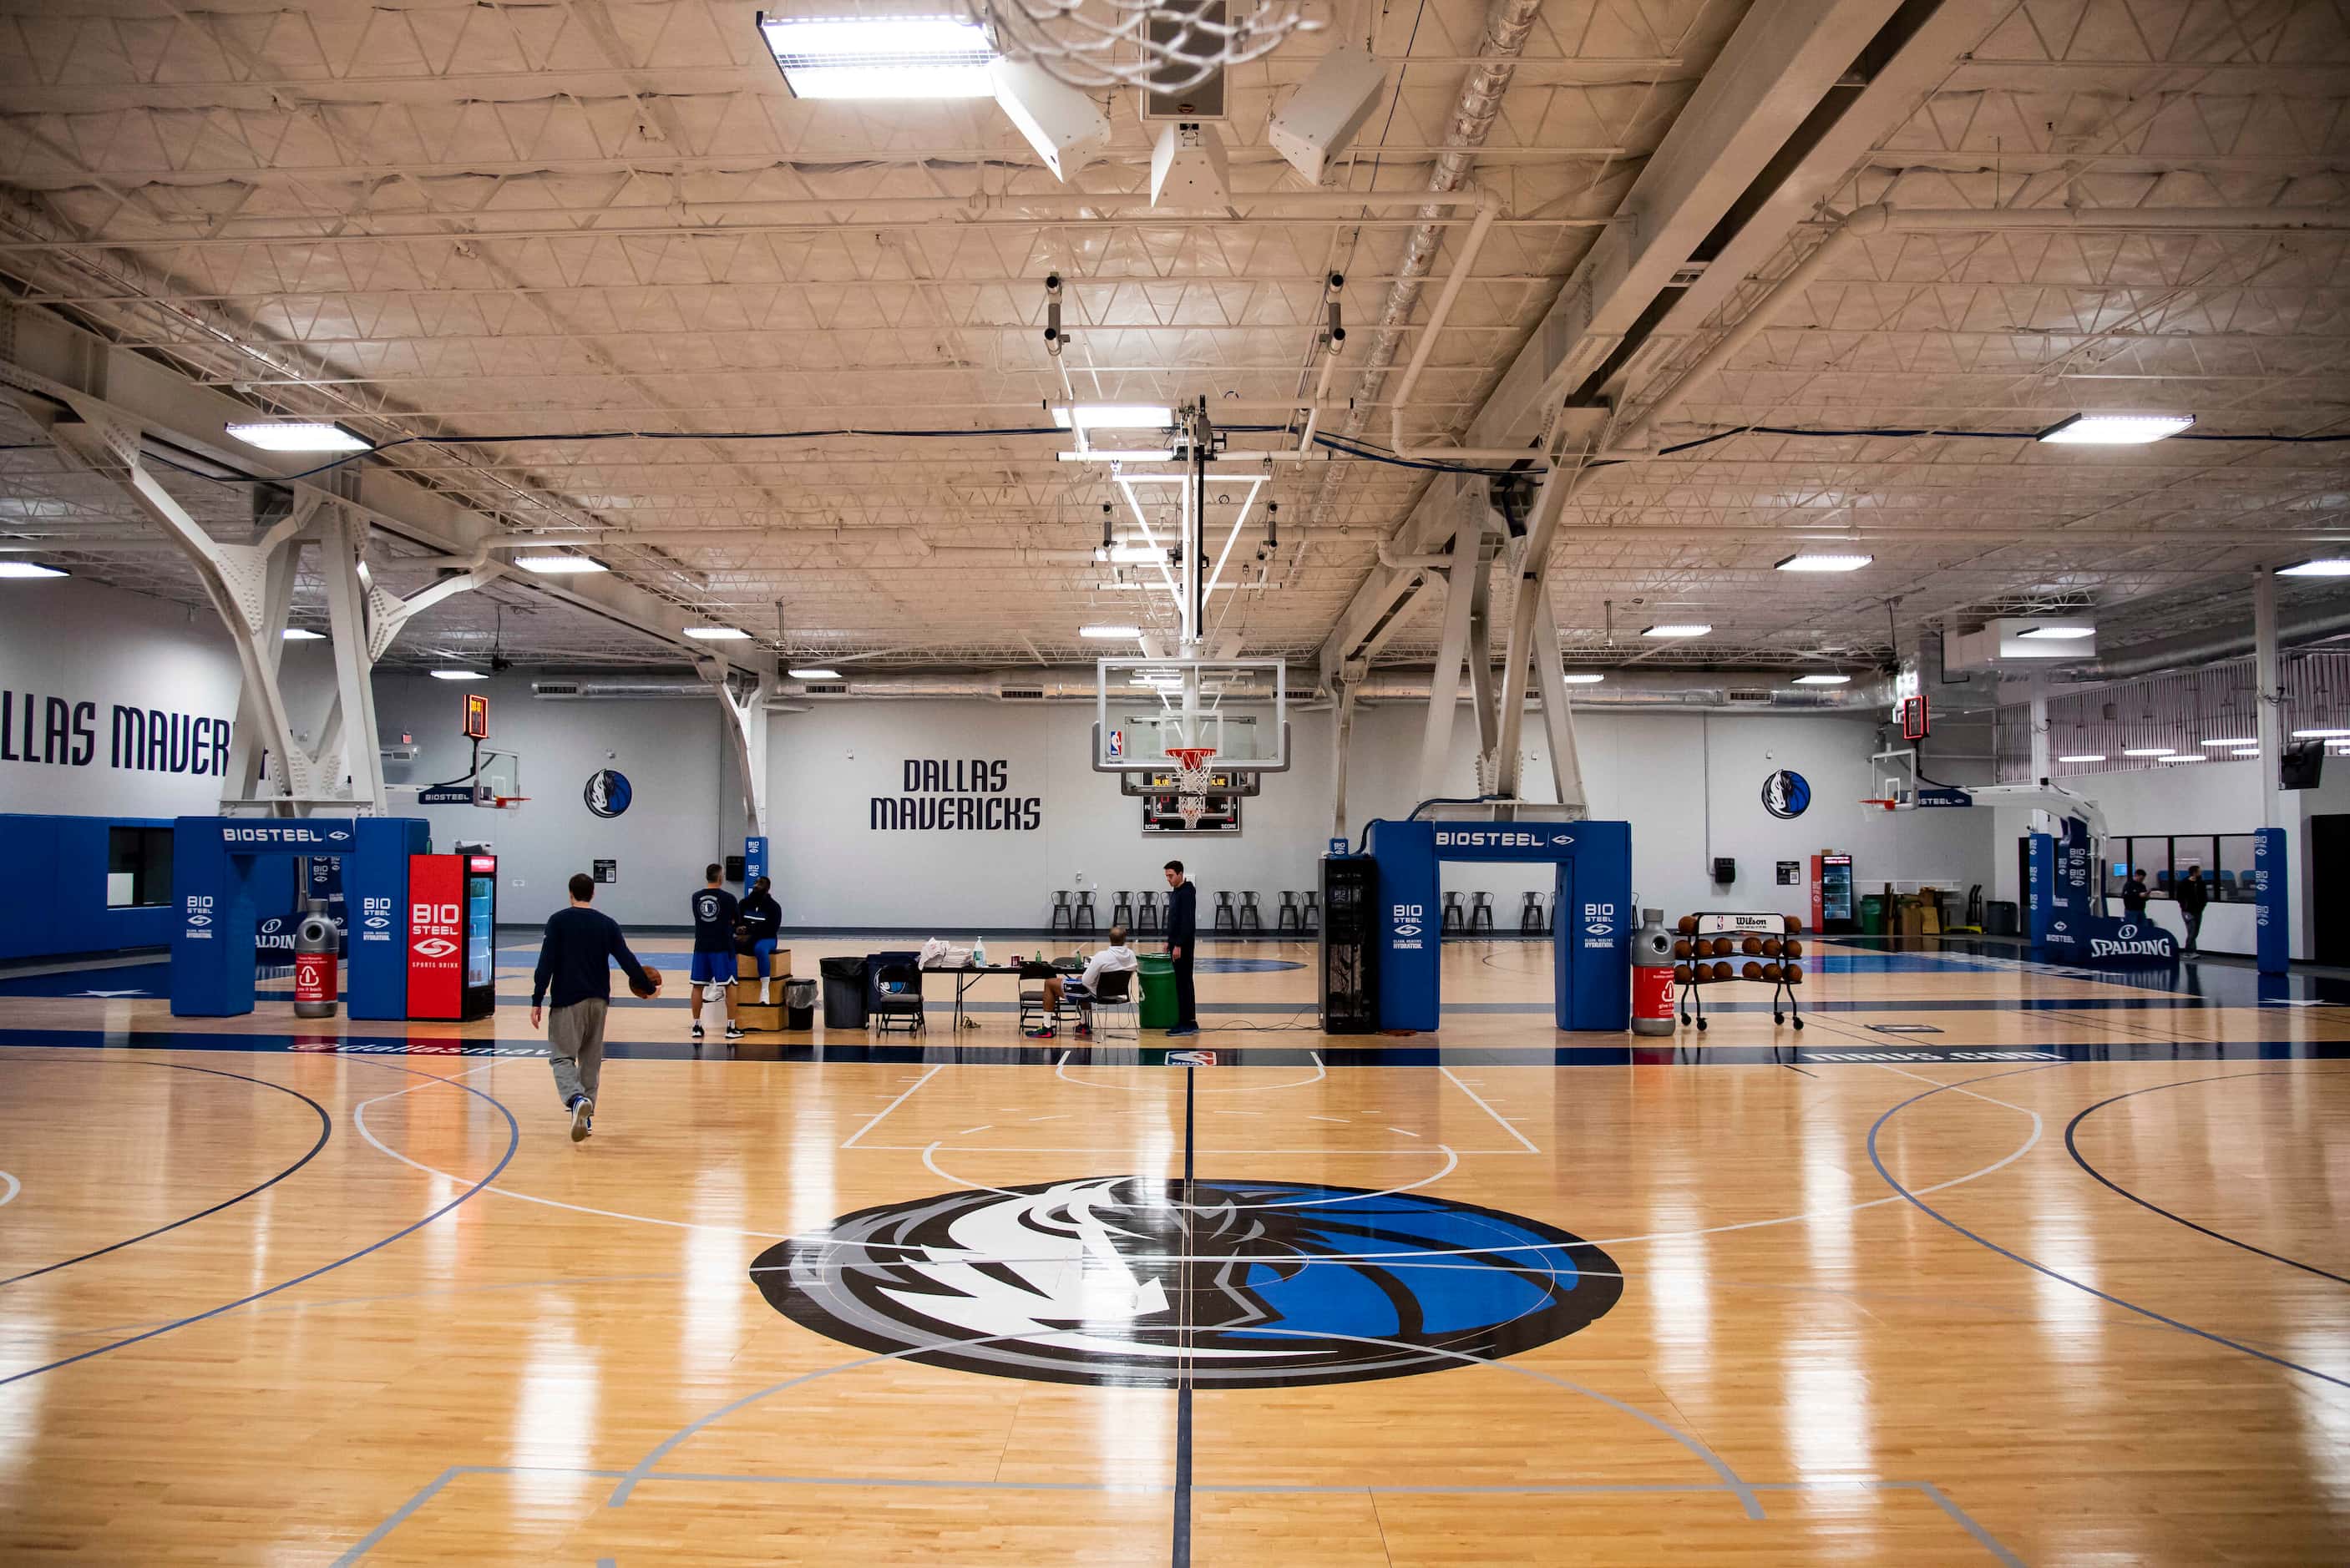 A view of the new practice court at the Dallas Mavericks BioSteel Practice Center in...